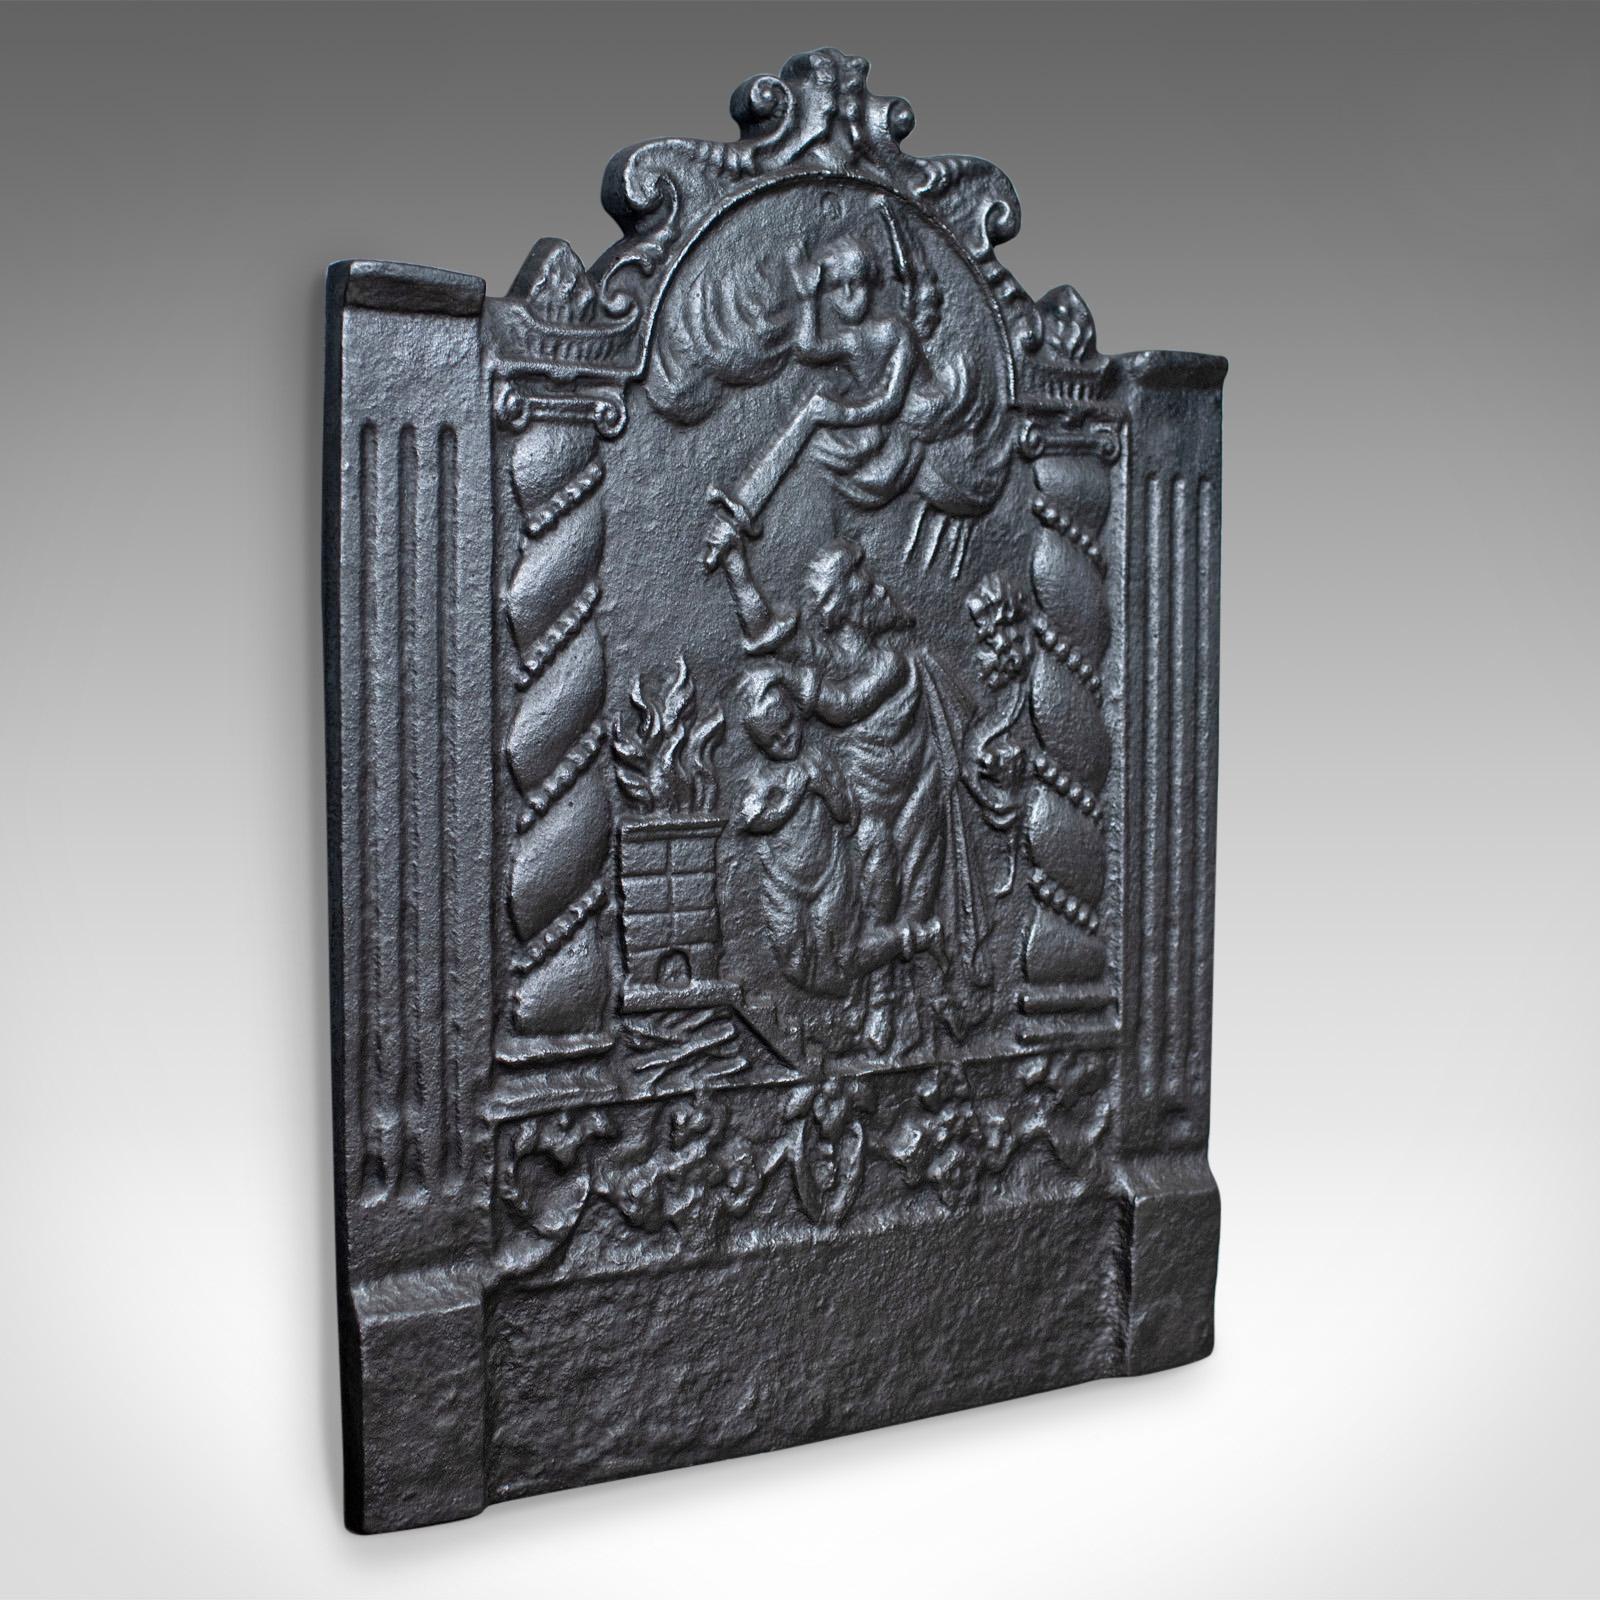 This is a cast iron fire back, a 17th century revival fire plate featuring figures and angel, late 20th century.

A most pleasing fire back presented in good condition
Crafted in heavy cast iron
Displaying figures with an angel holding back a